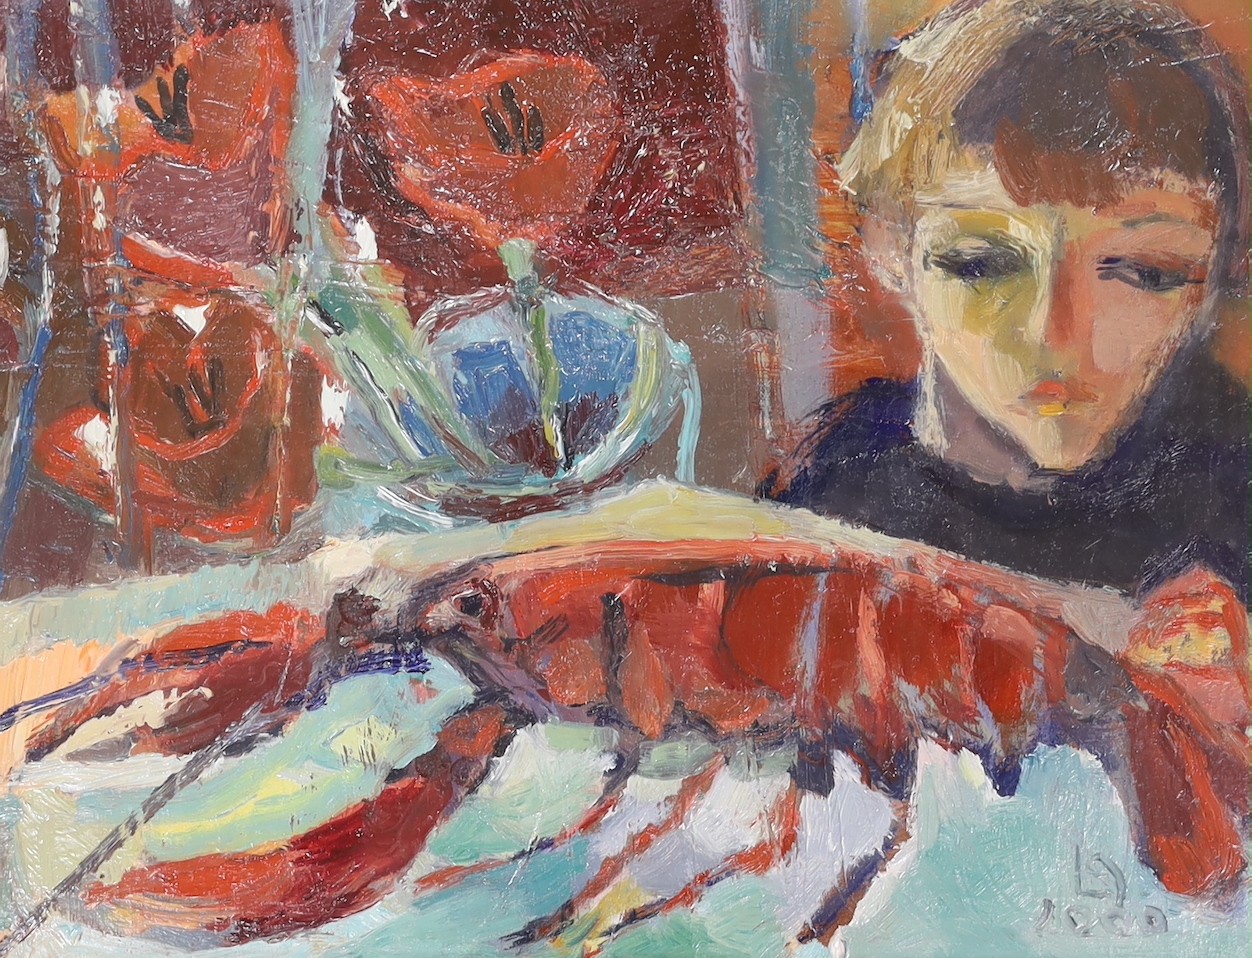 Modern British, oil on canvas, Boy and a lobster, initialled and dated 2000, 30 x 40cm